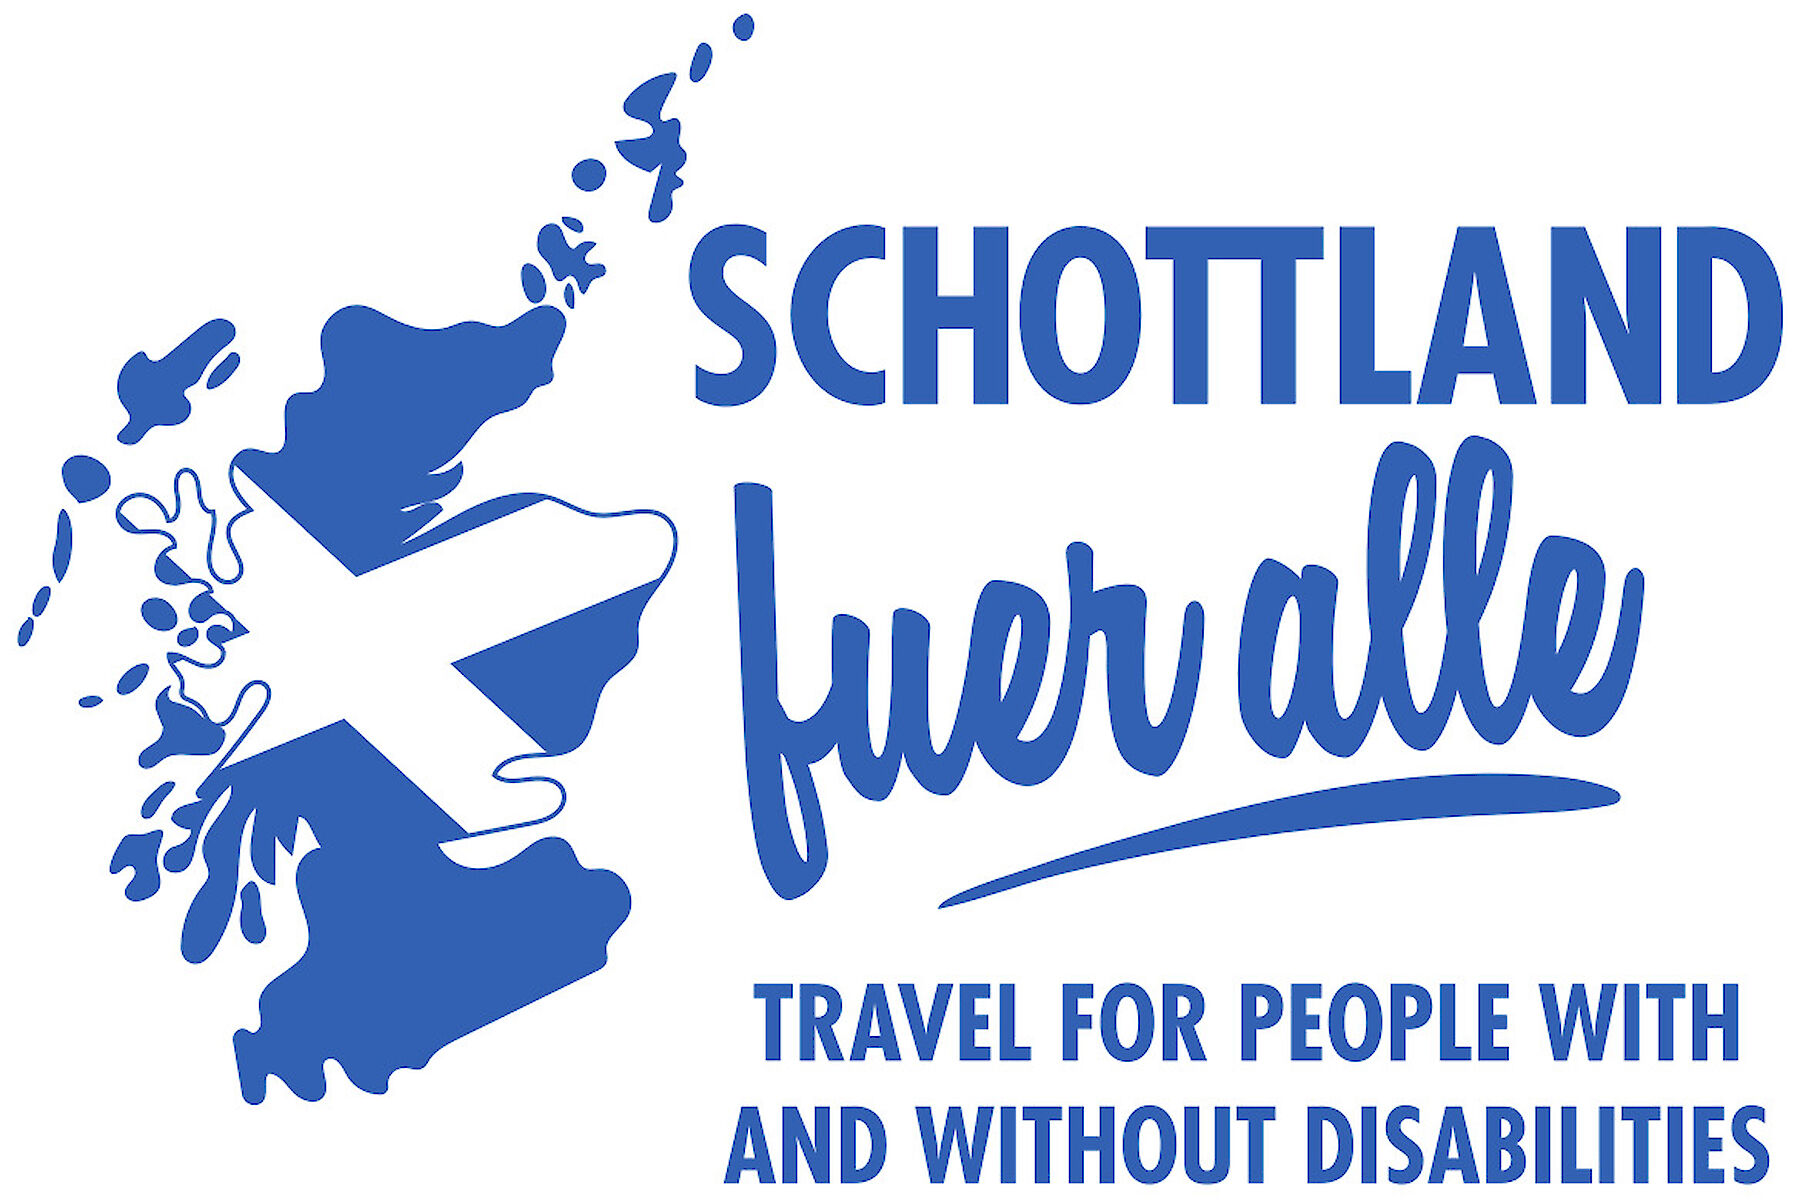 Schottland fuer Alle - Travel for people with and without disabilities